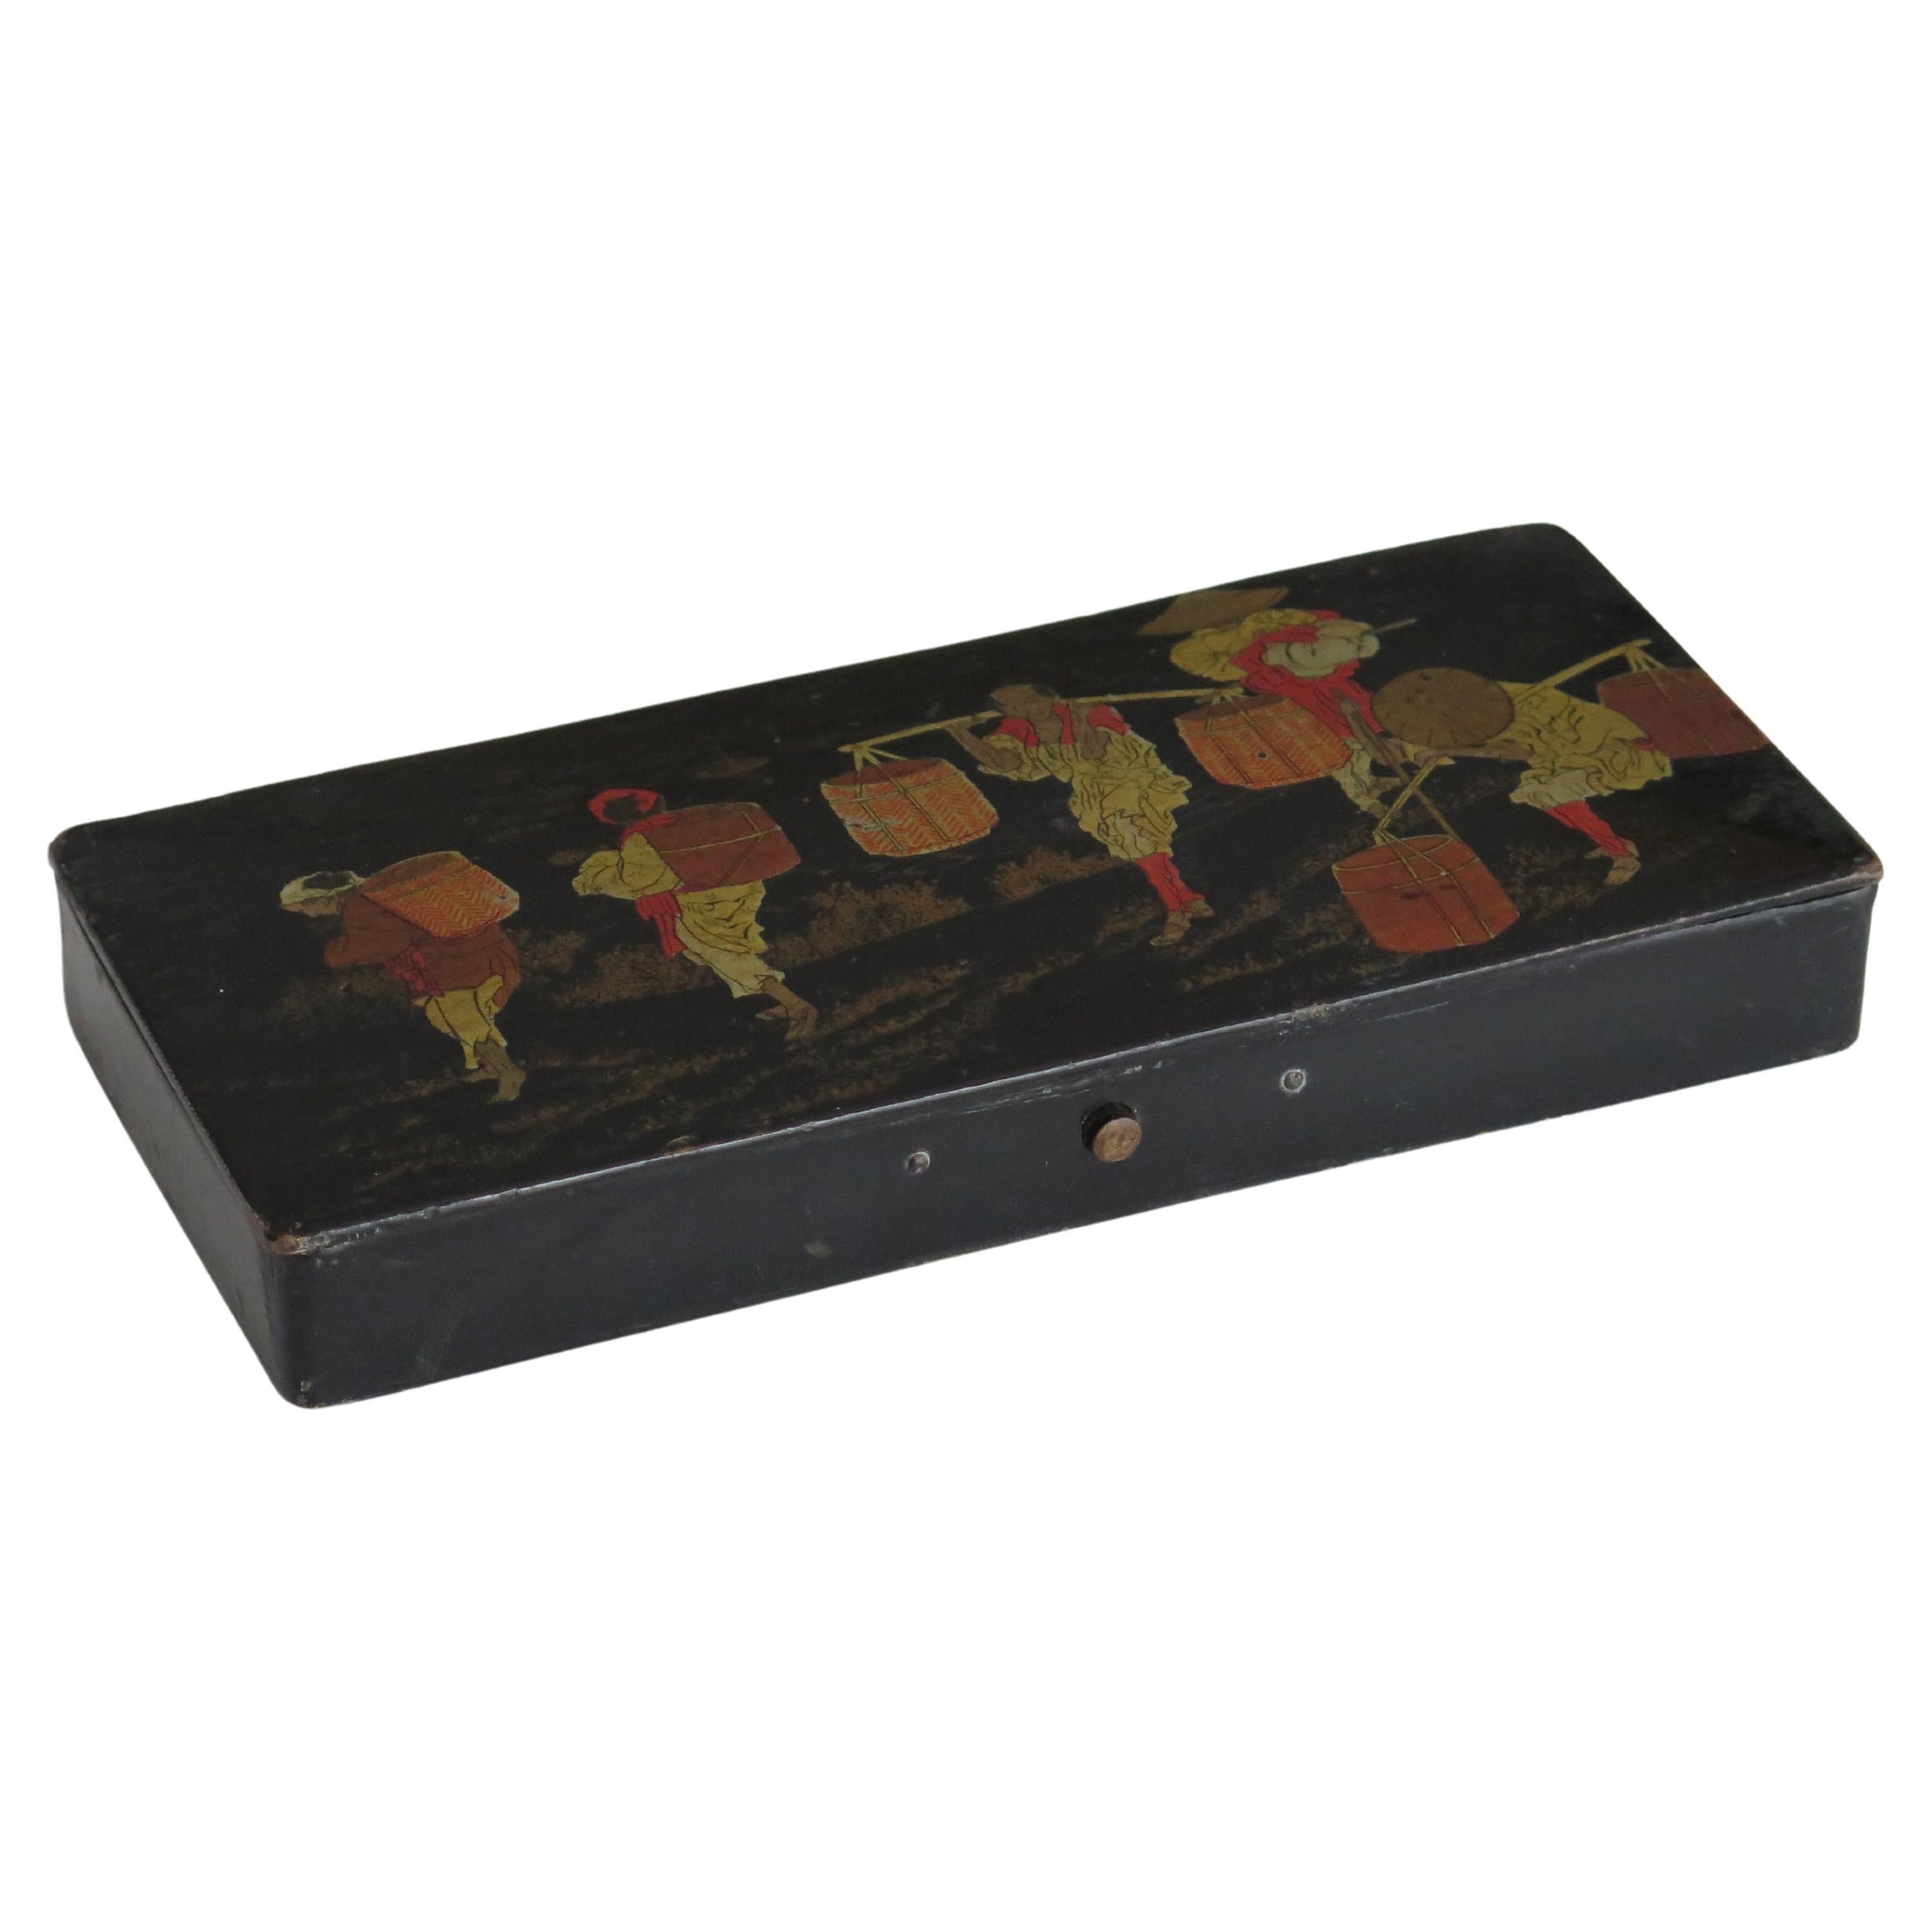 Japanese Laquered Box with Hinged Lid Hand Painted, 19th Century Meiji Period